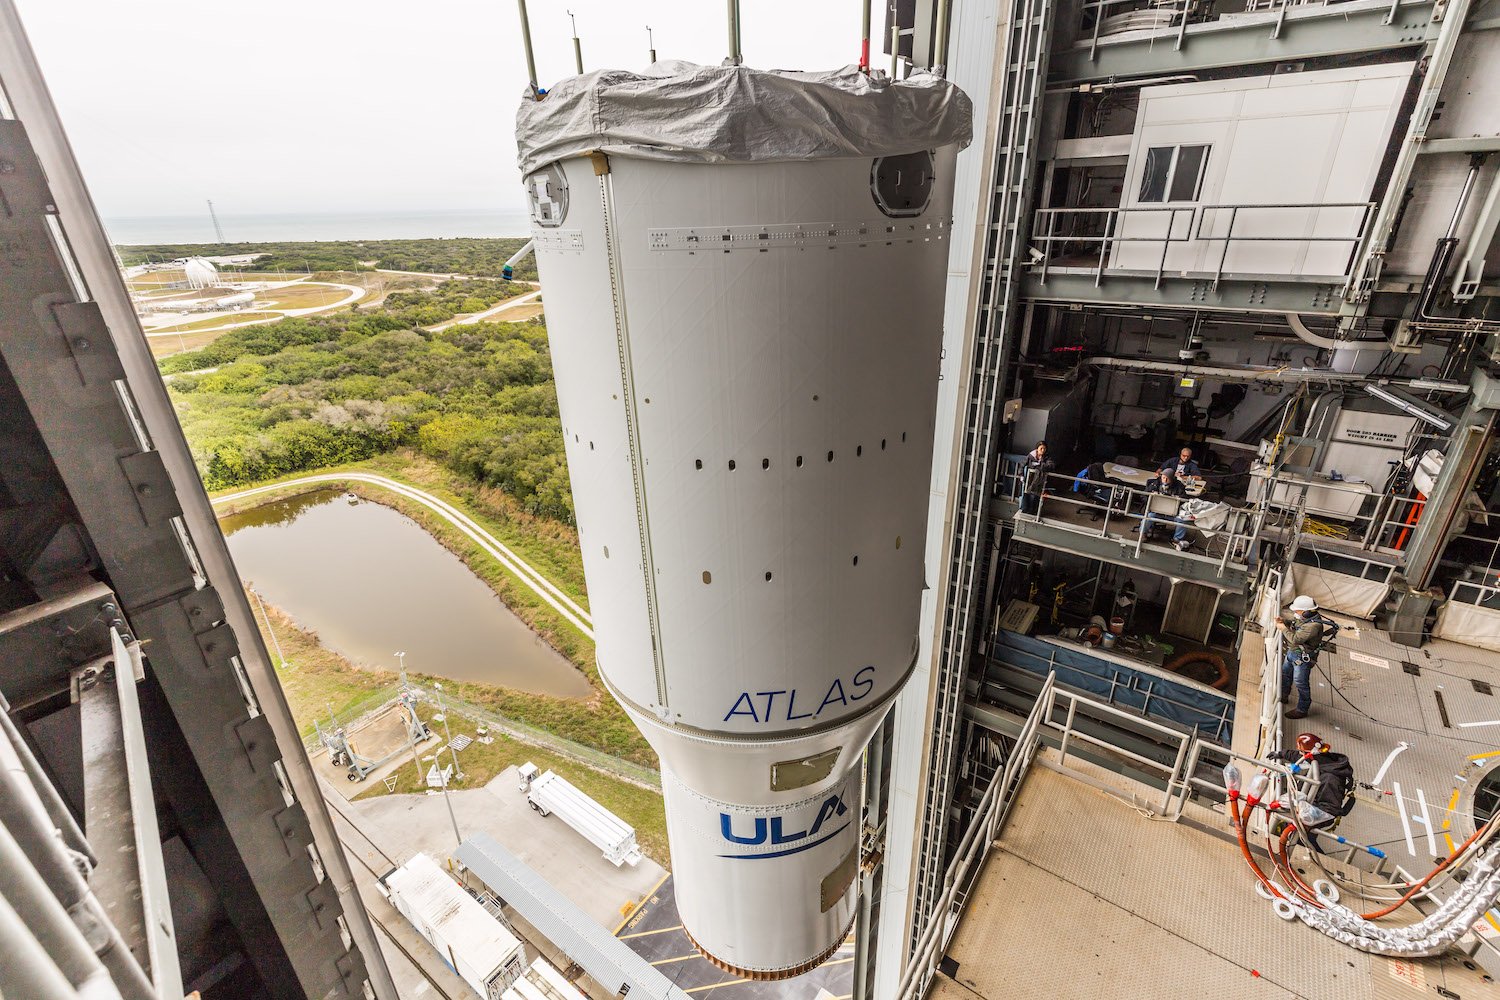 The Centaur is lifted atop the Atlas V first stage. Photo by United Launch Alliance